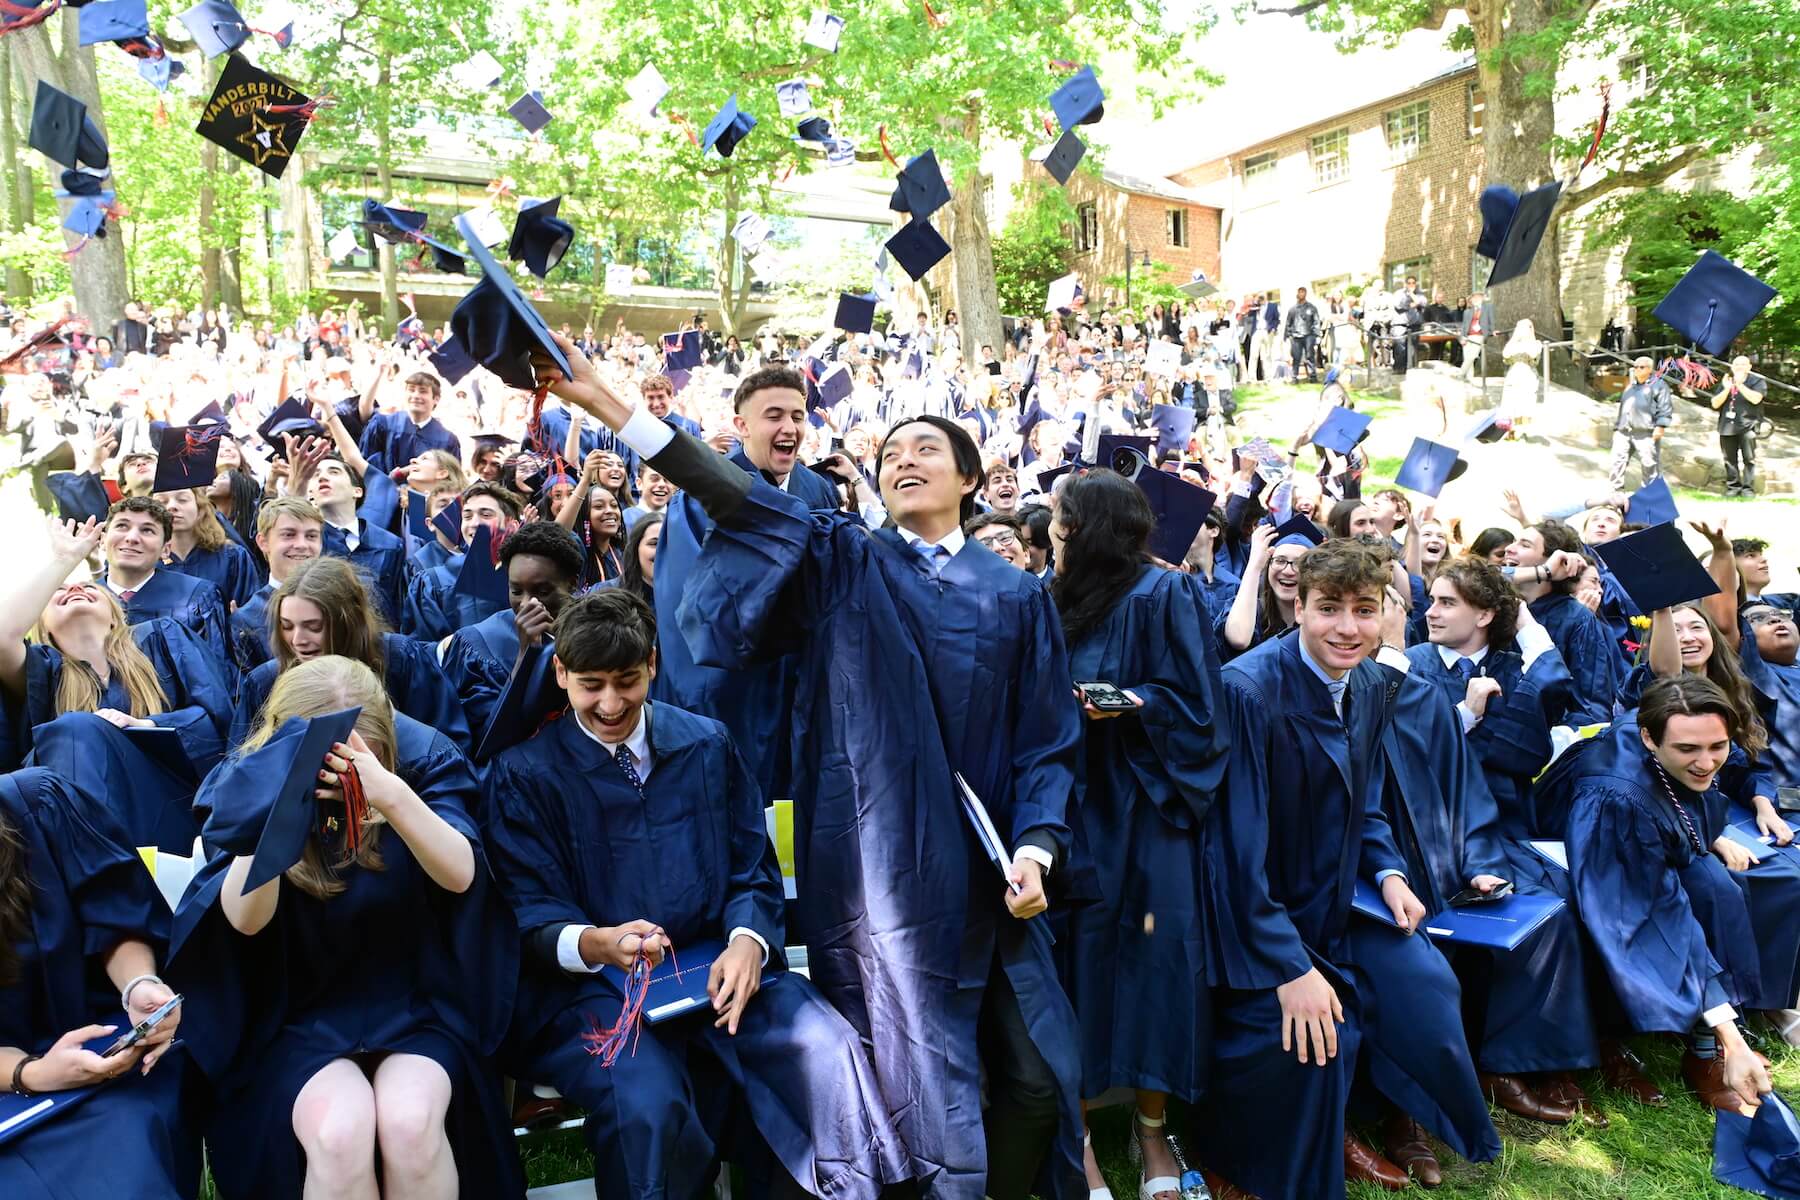 Ethical Culture Fieldston School Upper School graduates celebrate by tossing their caps into the air